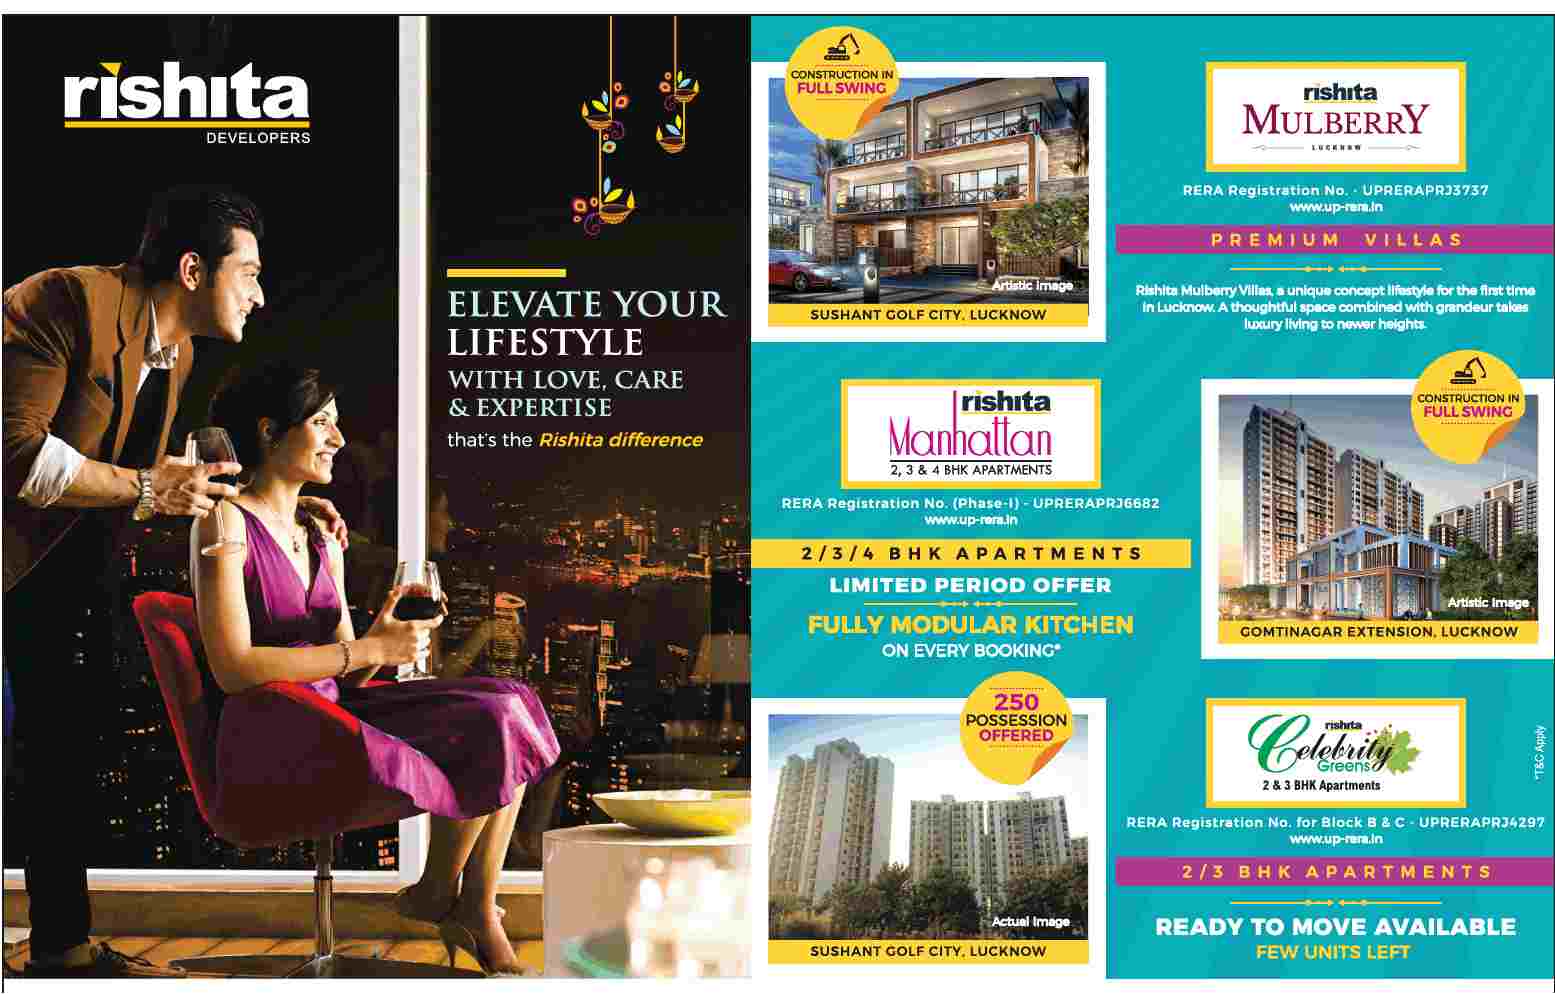 Elevate your lifestyle with love, care and expertise at Rishita Properties in Lucknow Update